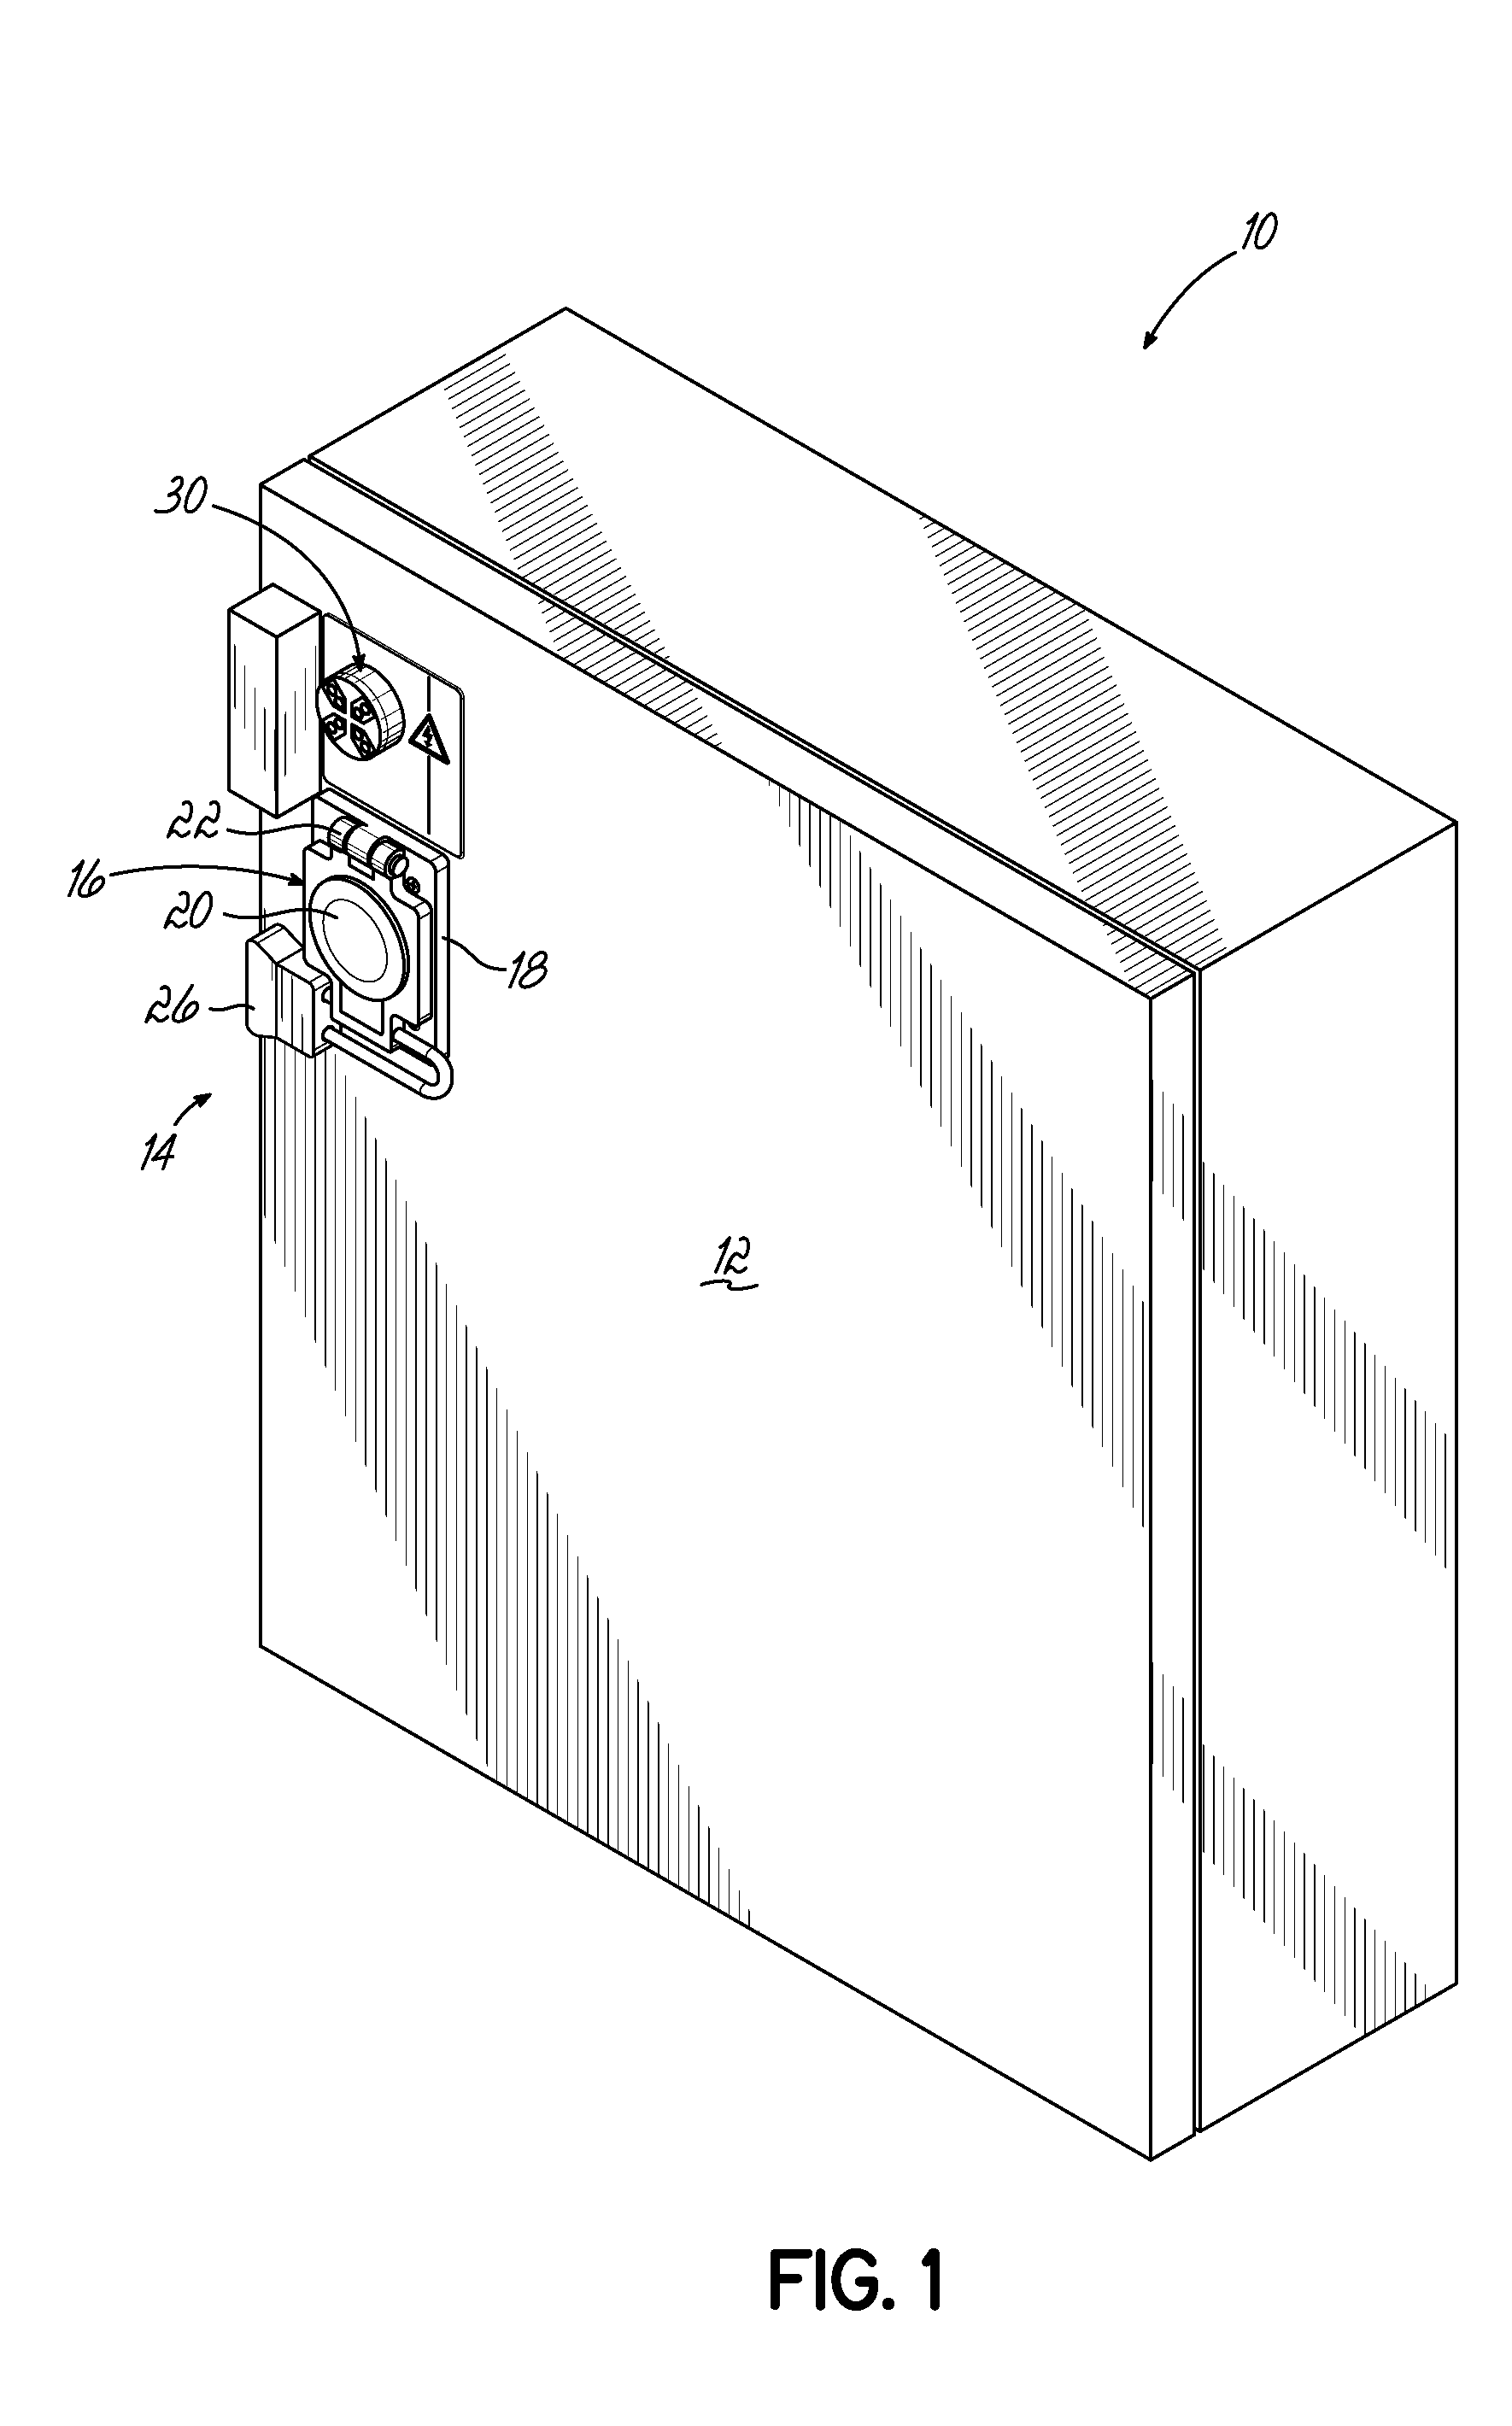 Contact voltage detection system and method